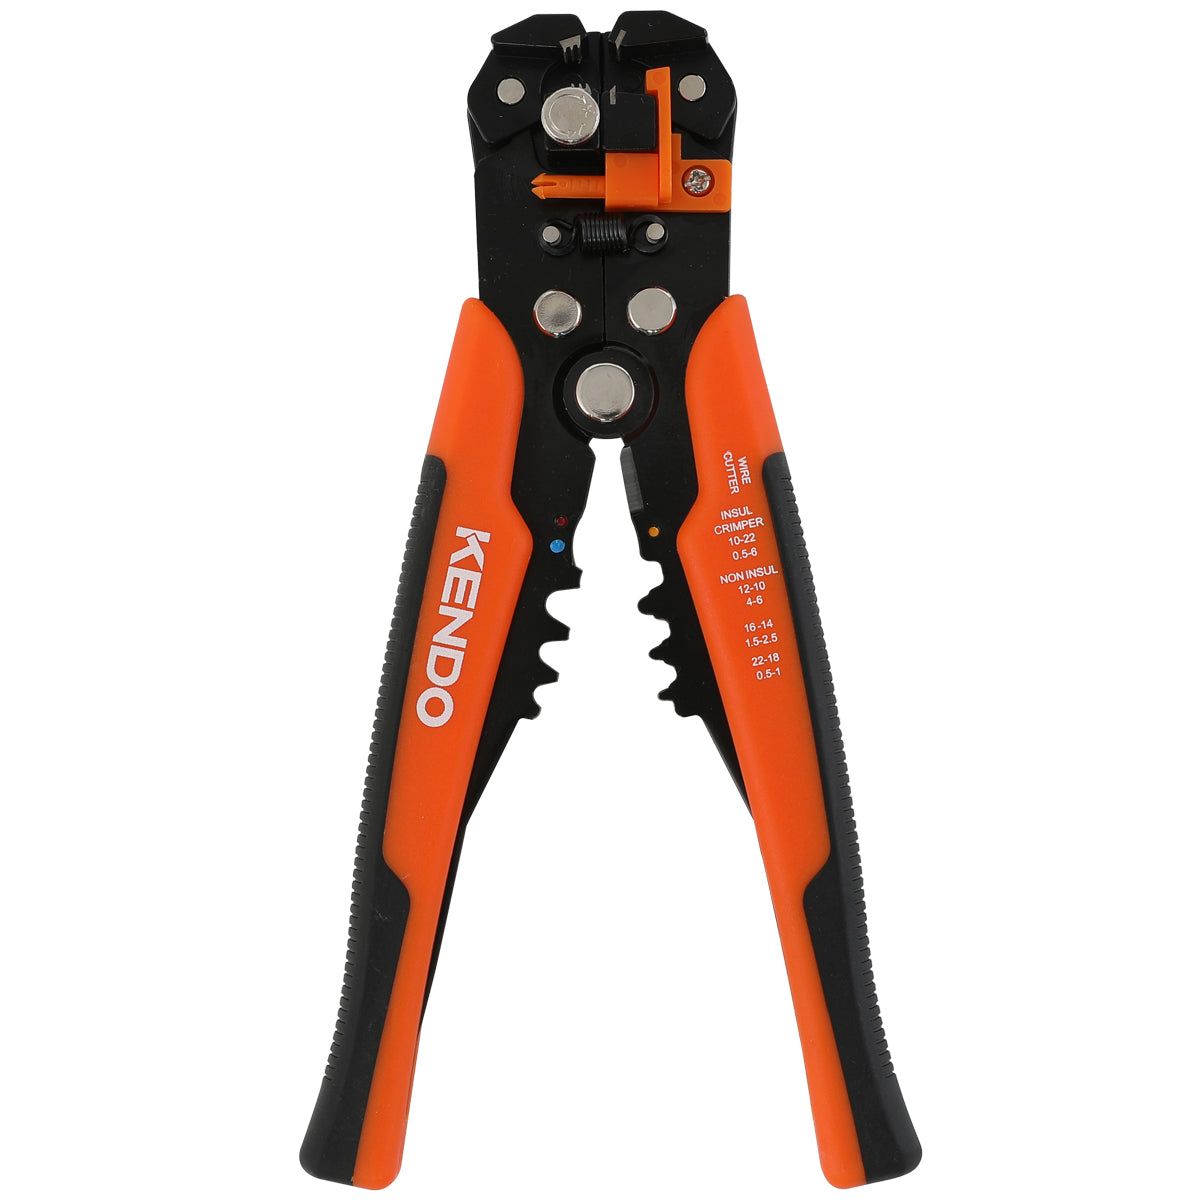 Kendo 200mm Automatic Wire Stripping & Crimping Pliers